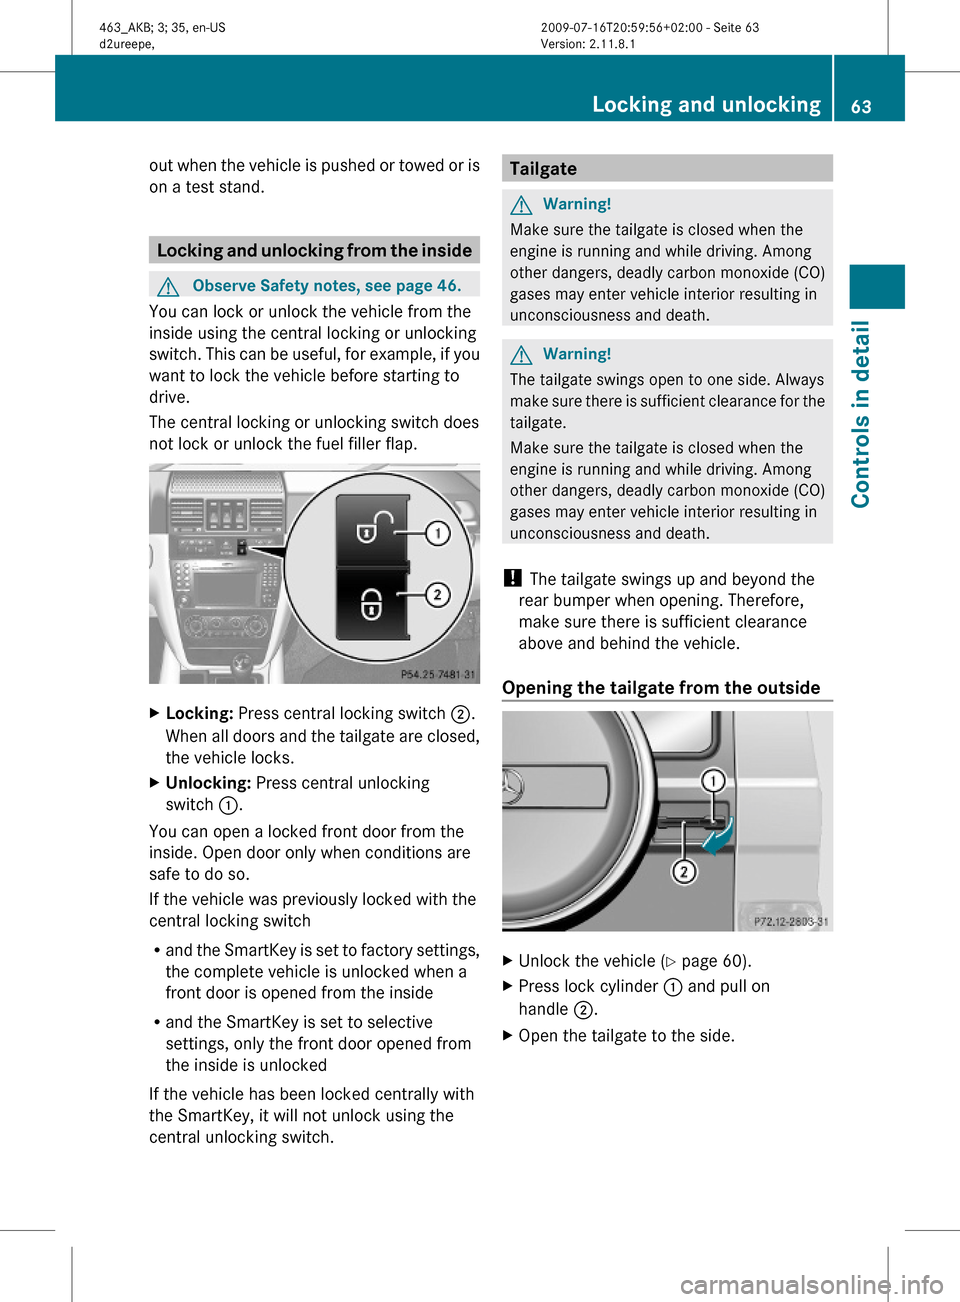 MERCEDES-BENZ G55AMG 2010 W463 Owners Manual out when the vehicle is pushed or towed or is
on a test stand.
Locking and unlocking from the inside
GObserve Safety notes, see page 46.
You can lock or unlock the vehicle from the
inside using the ce